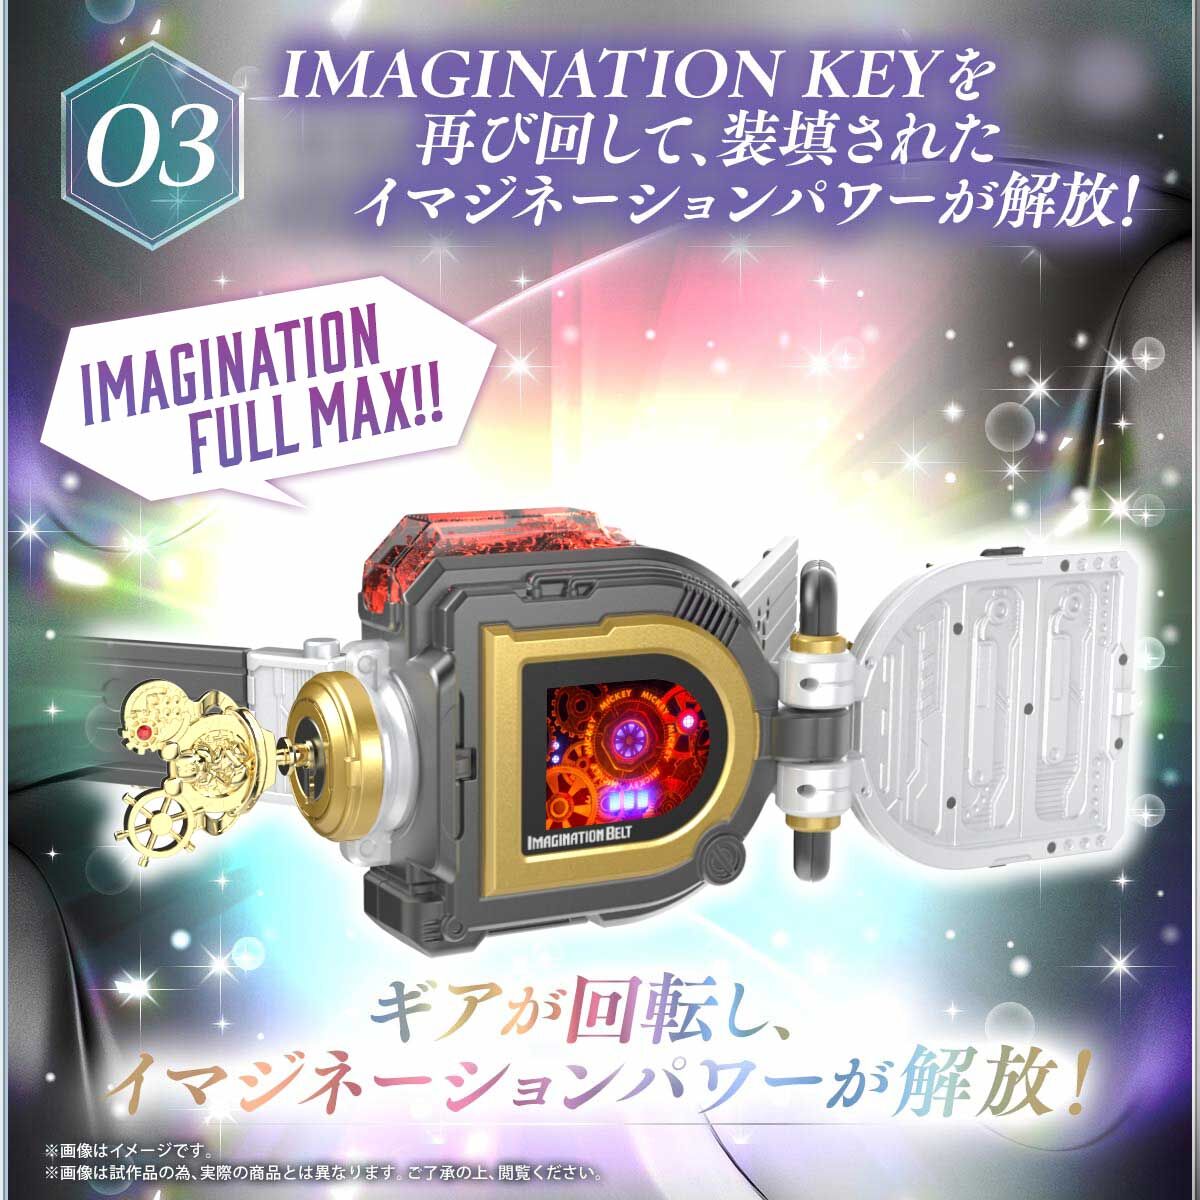 New DX Imagination Belt Release Info & Preview Images Released - Tokunation